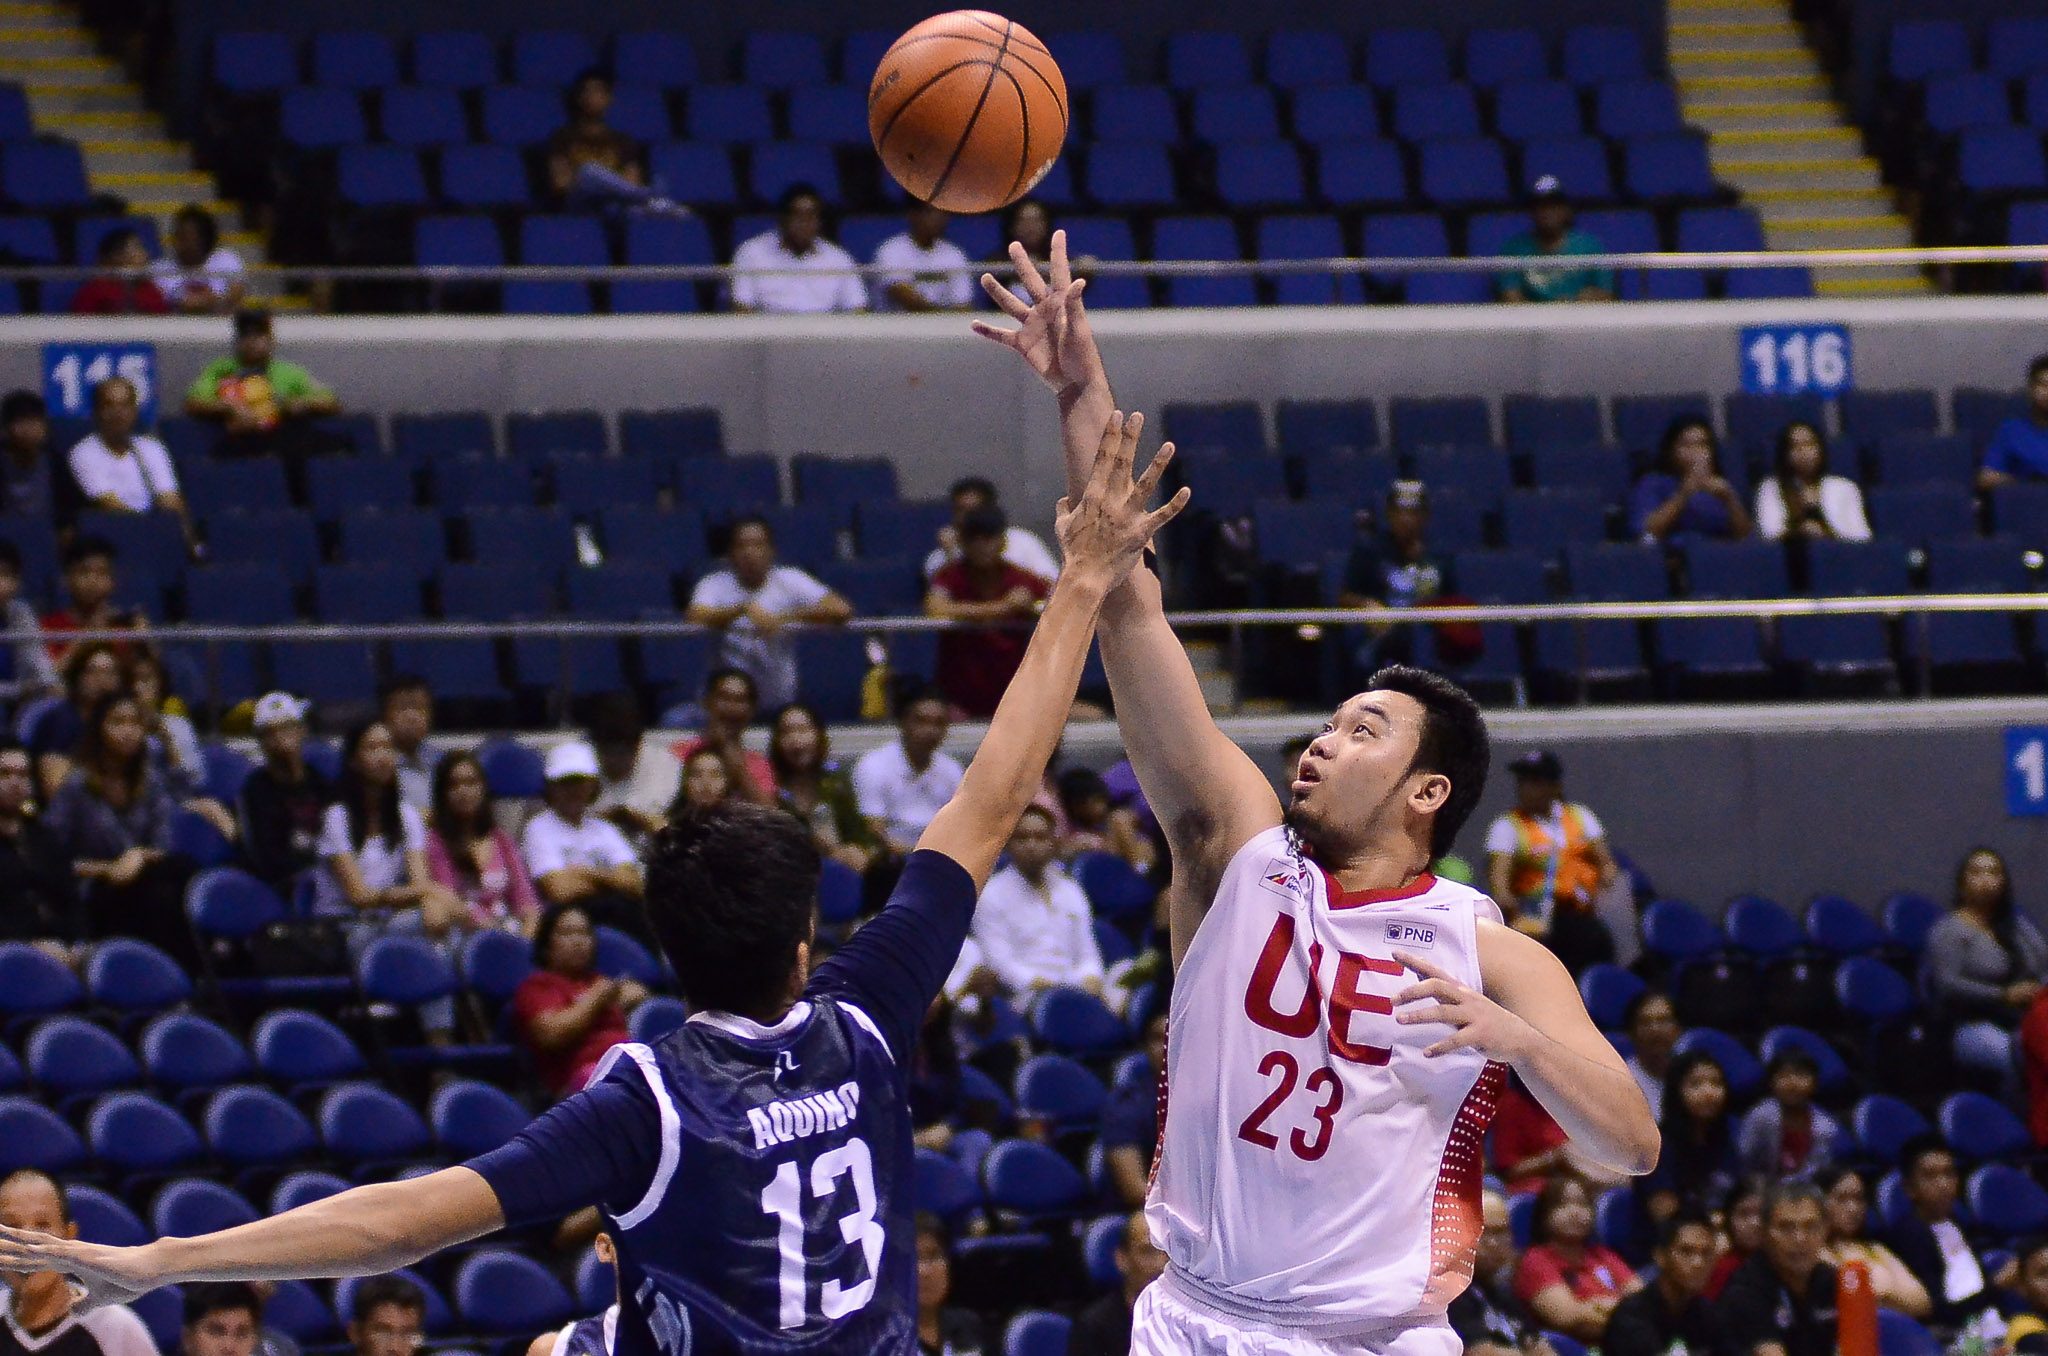 UE Red Warriors topple NU Bulldogs to win second straight